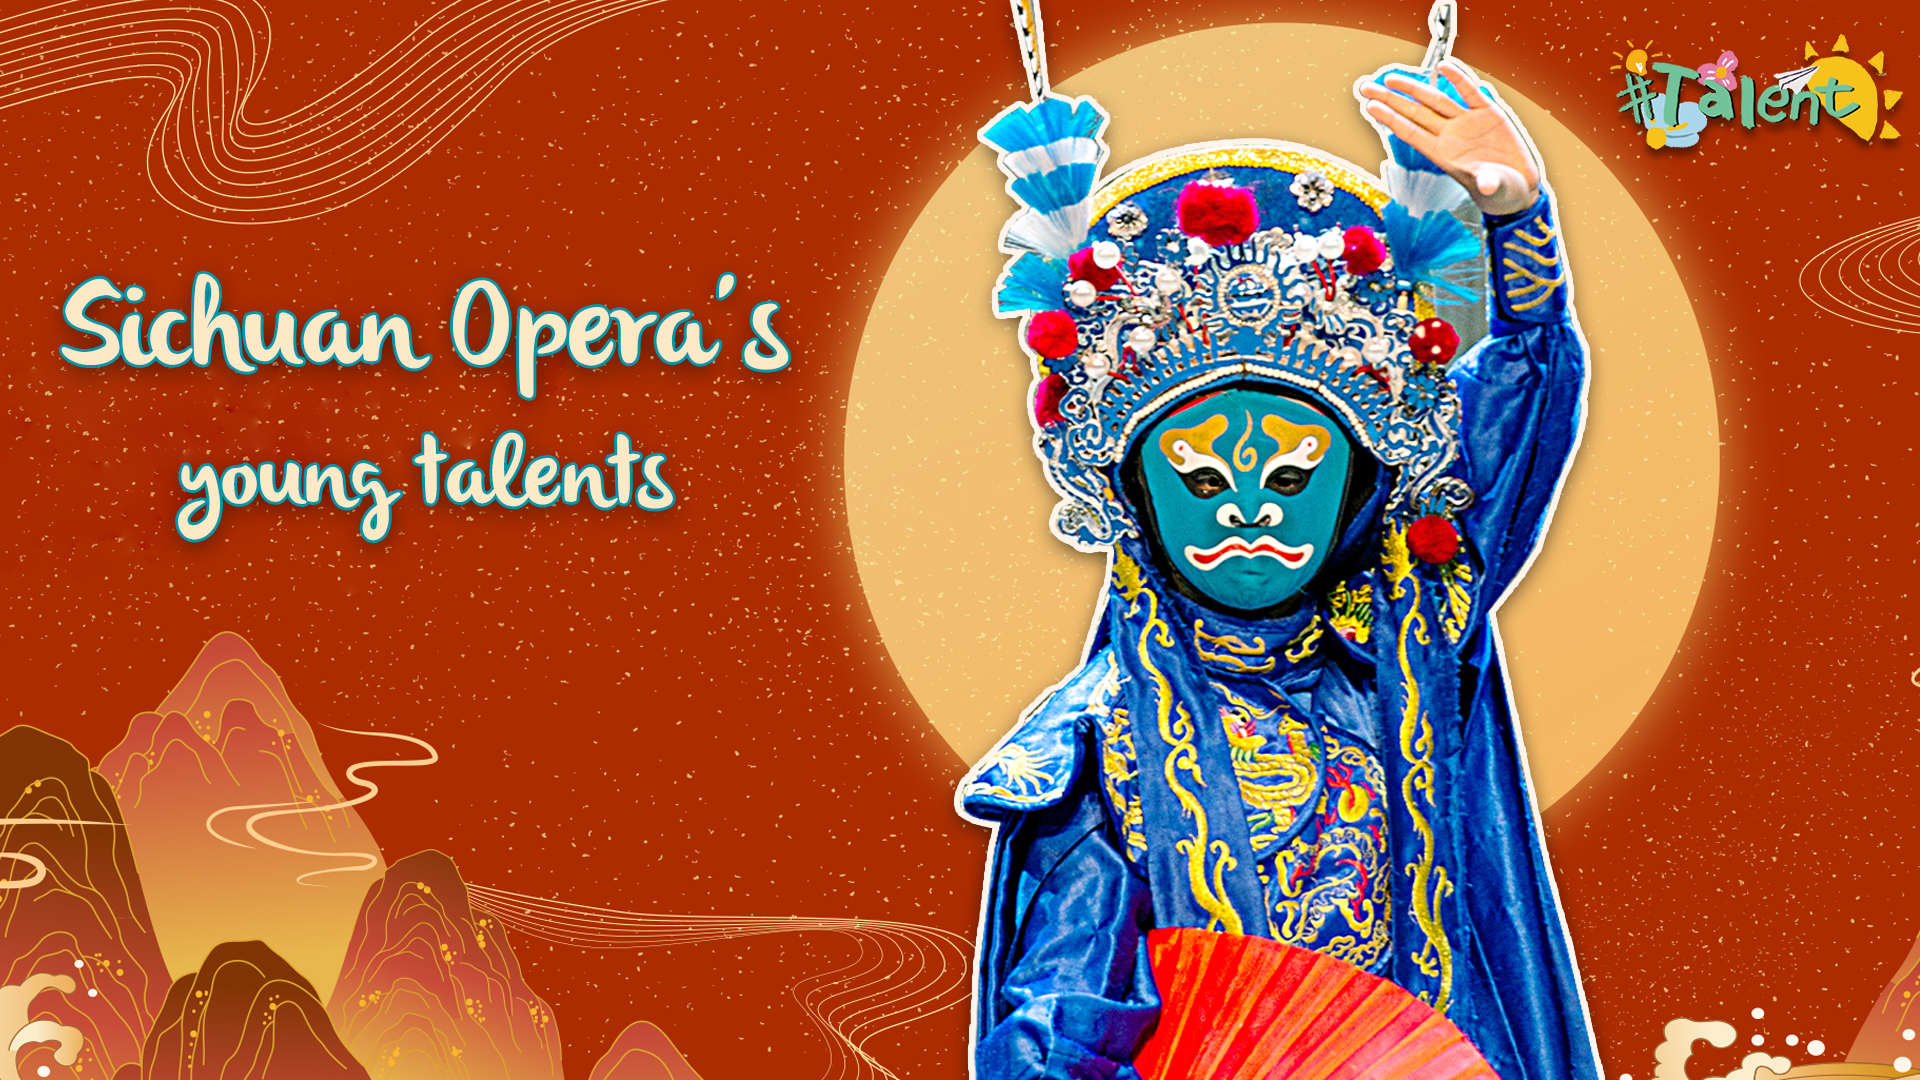 Live: More than face-changing: Sichuan Opera's young talents